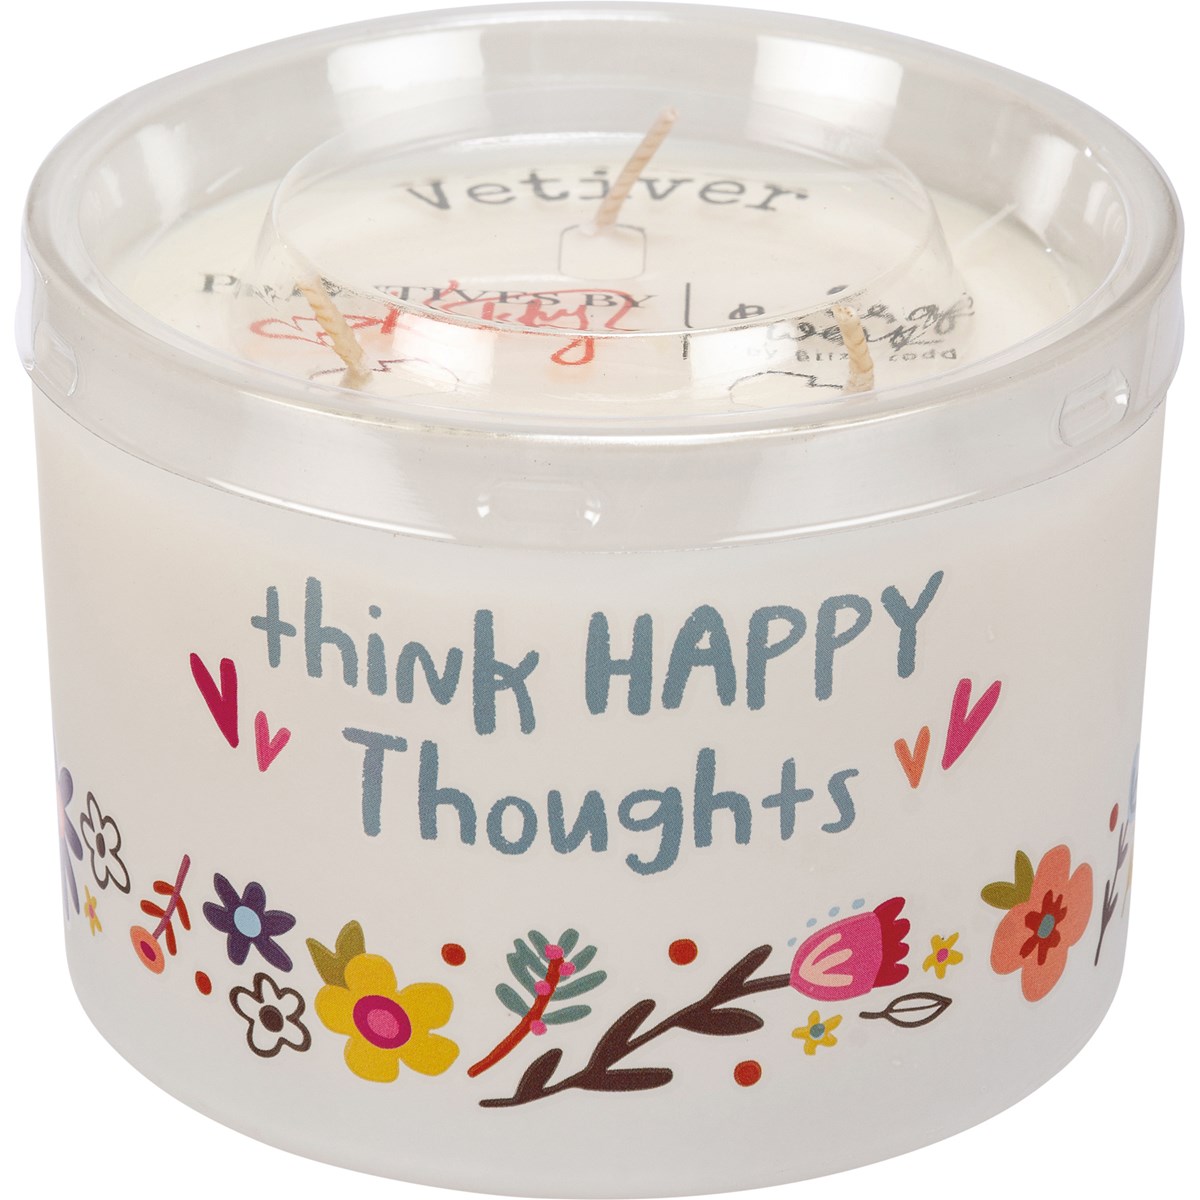 Think Happy Thoughts Candle - Soy Wax, Glass, Cotton